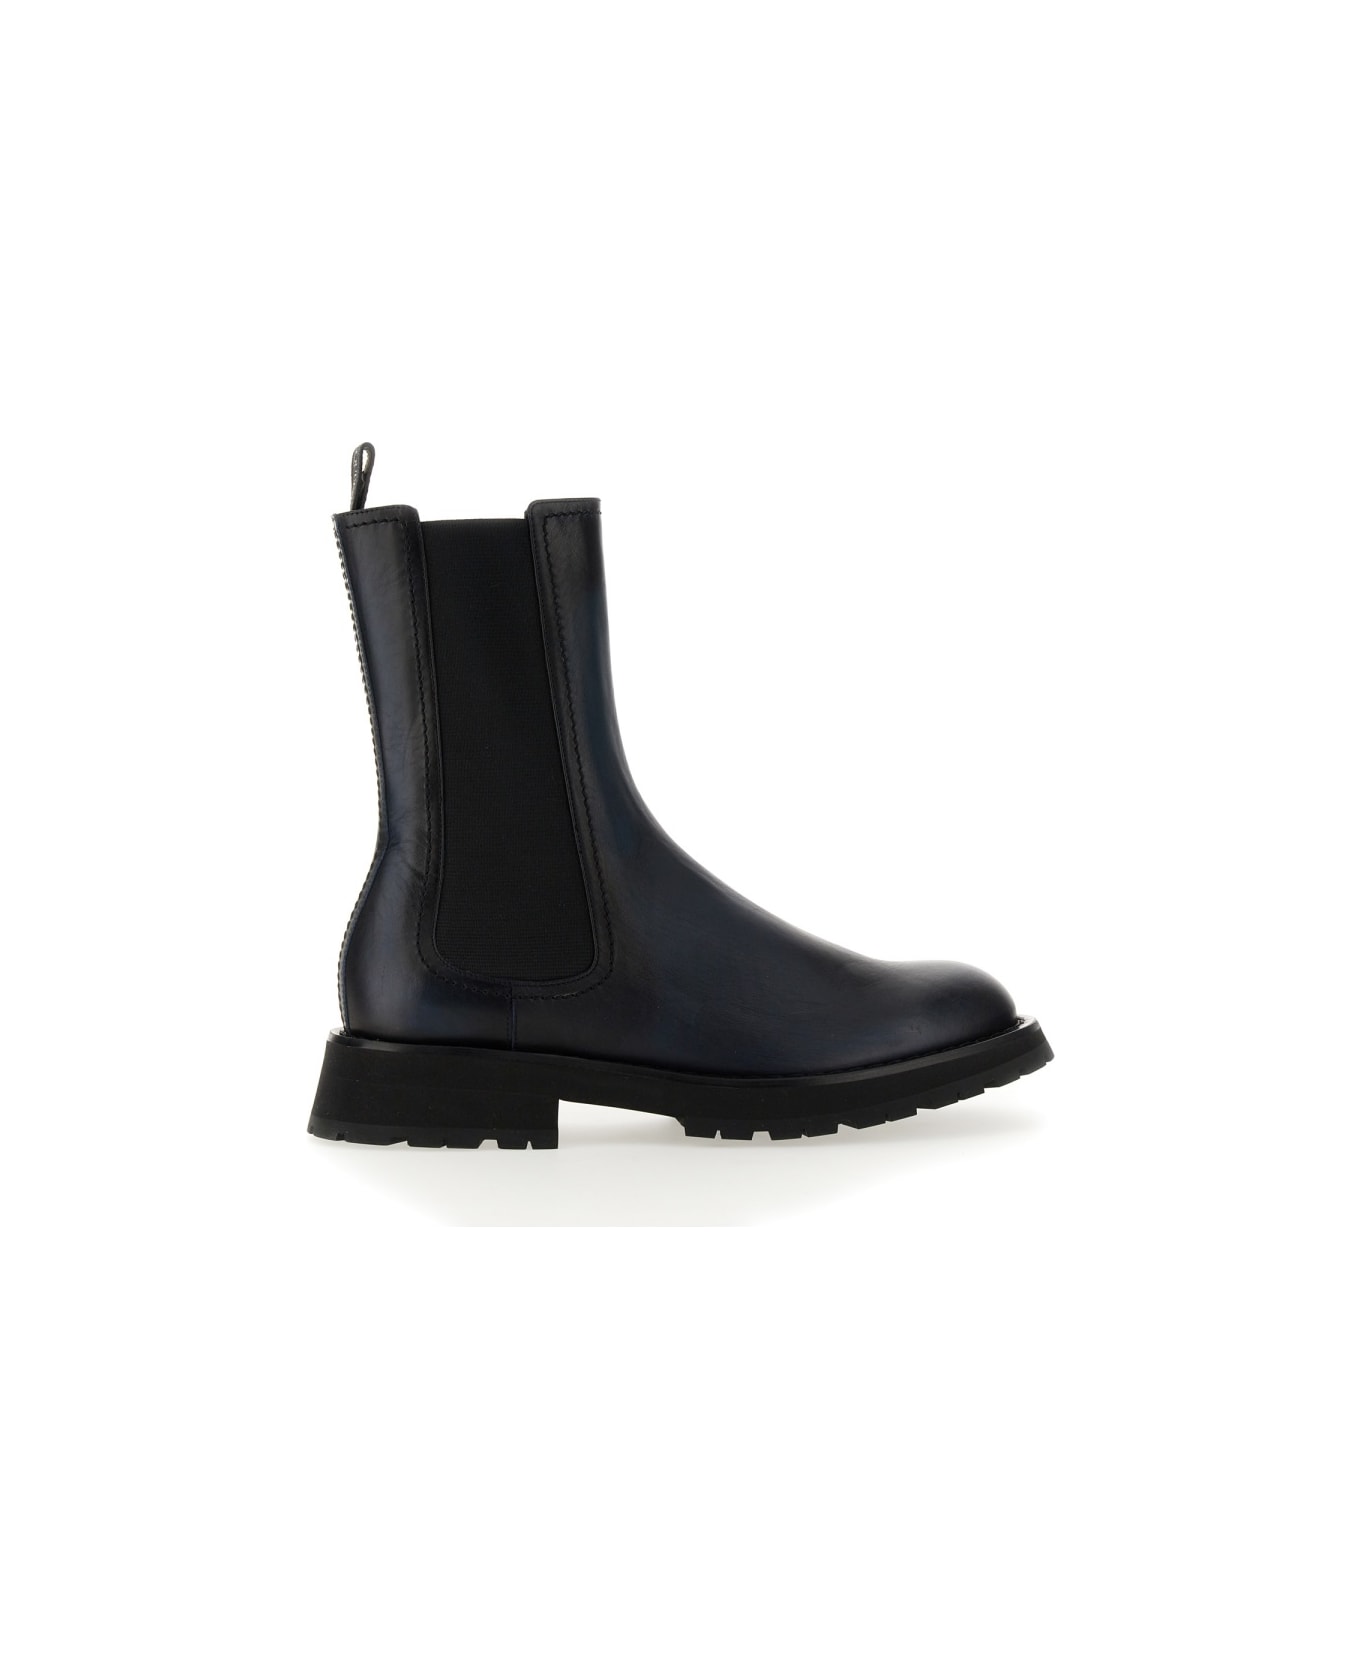 Alexander McQueen Leather Boot - CHARCOAL